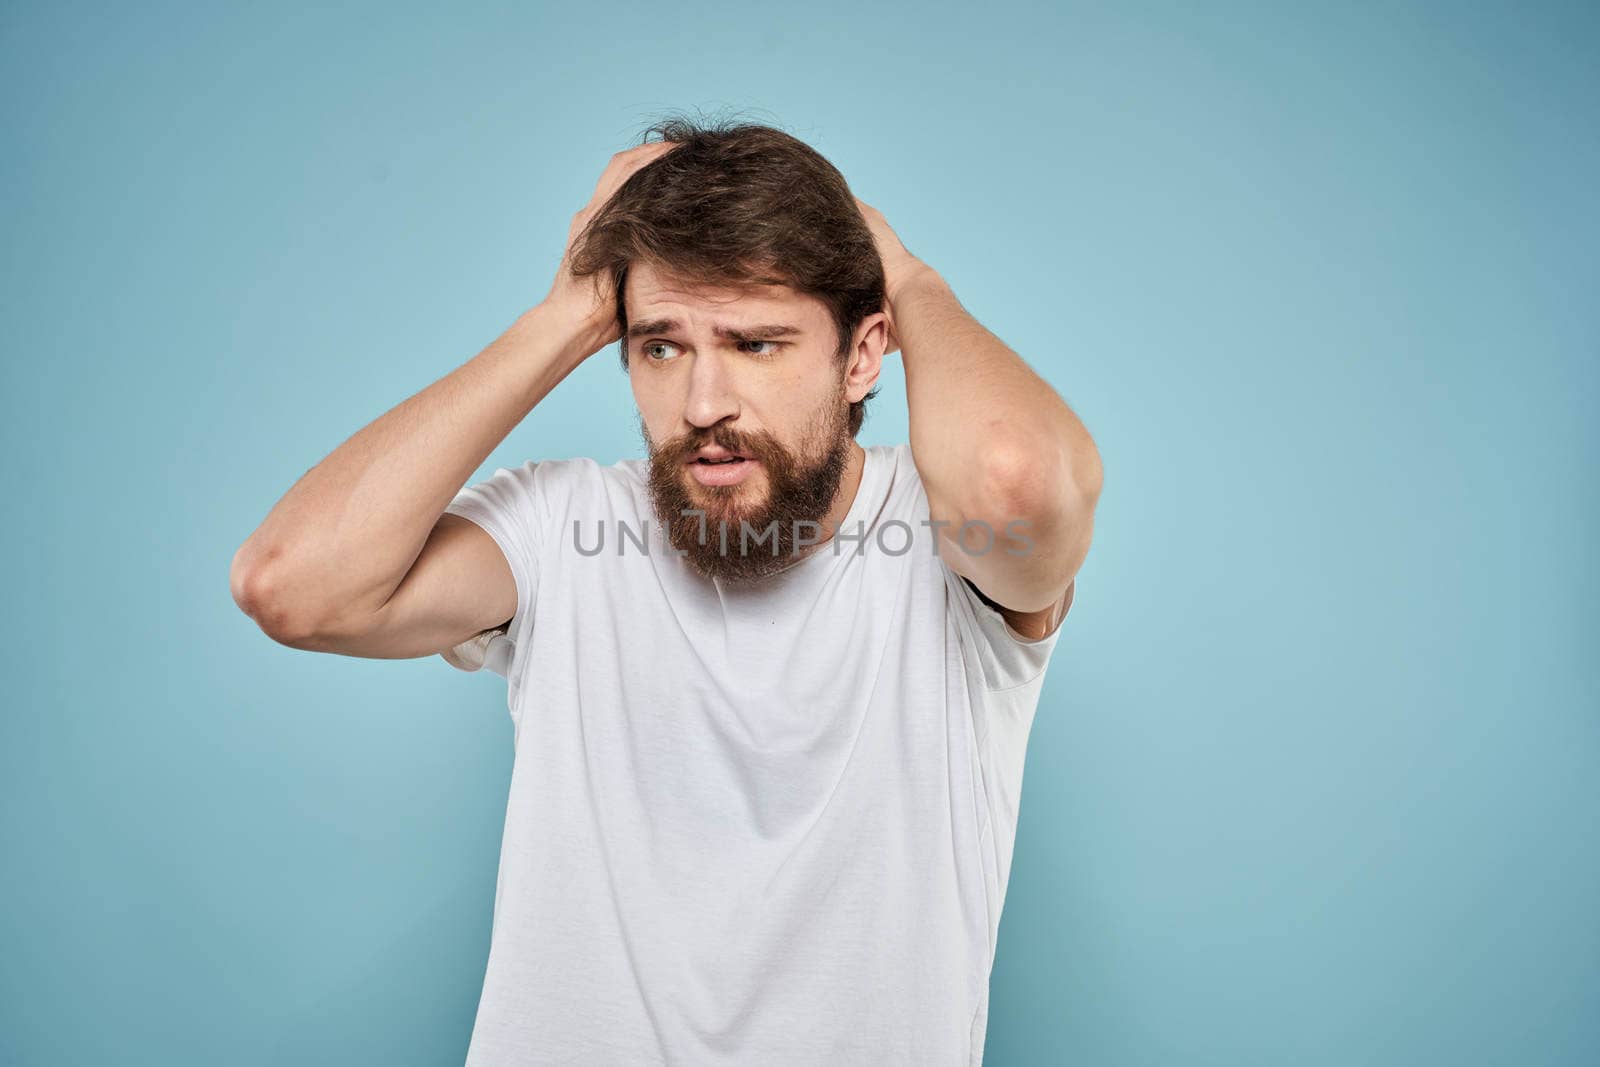 Man in white t-shirt emotions facial expression cropped view studio blue background lifestyle. High quality photo